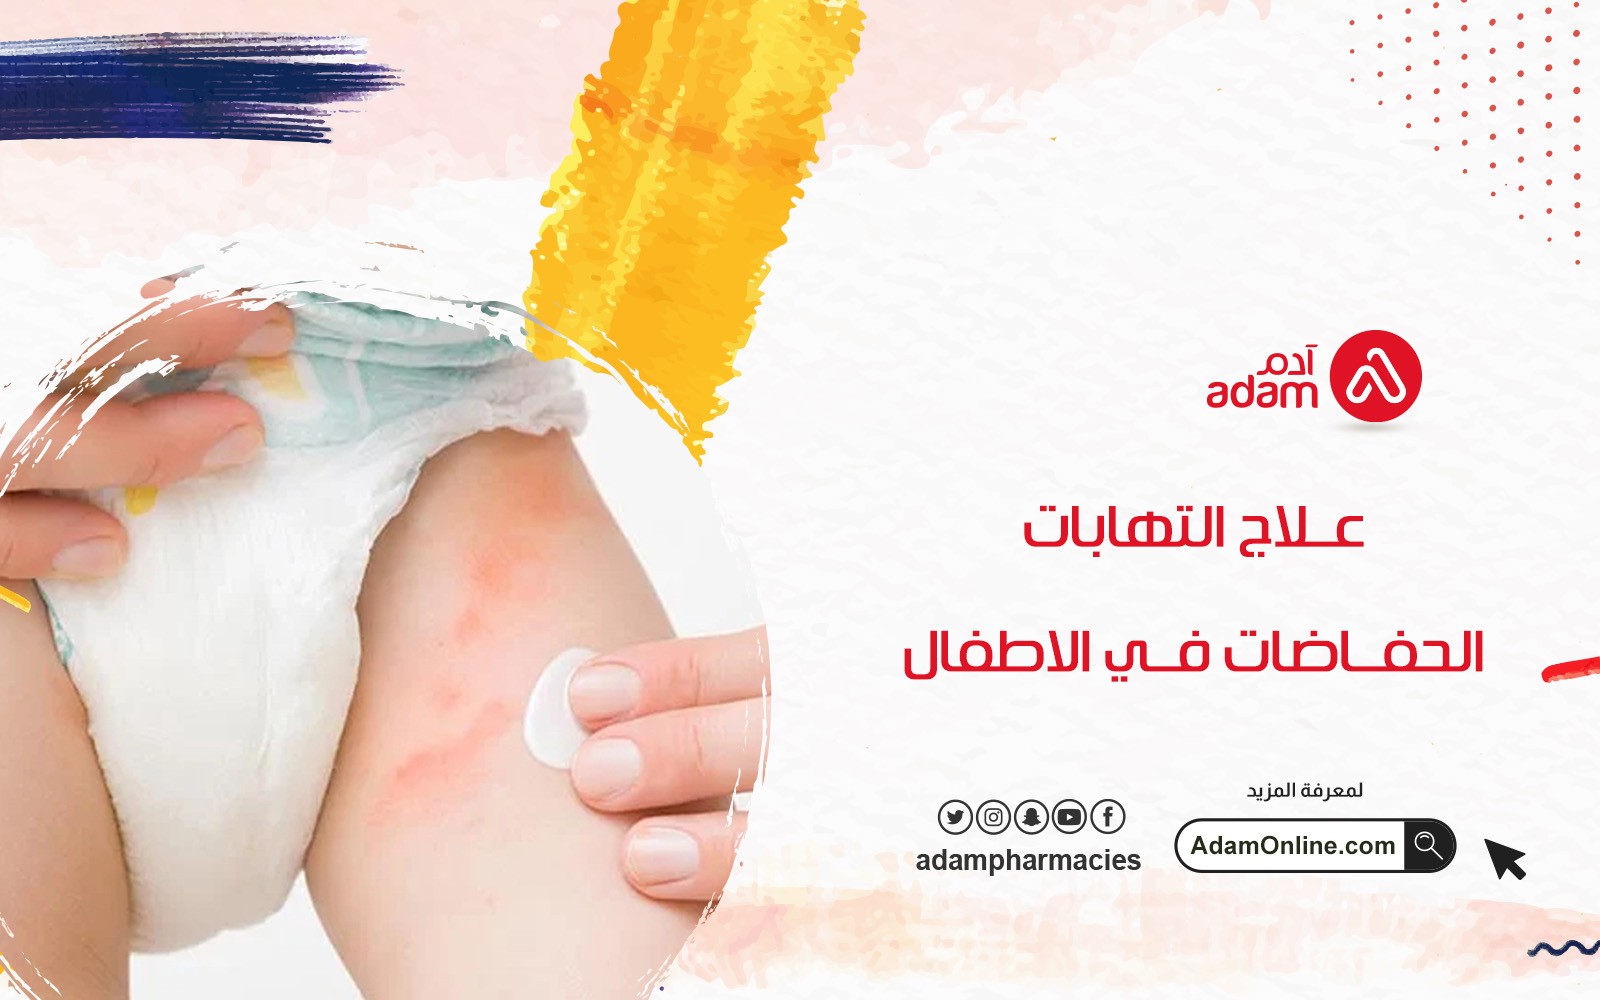 Treatment of diaper infections in children